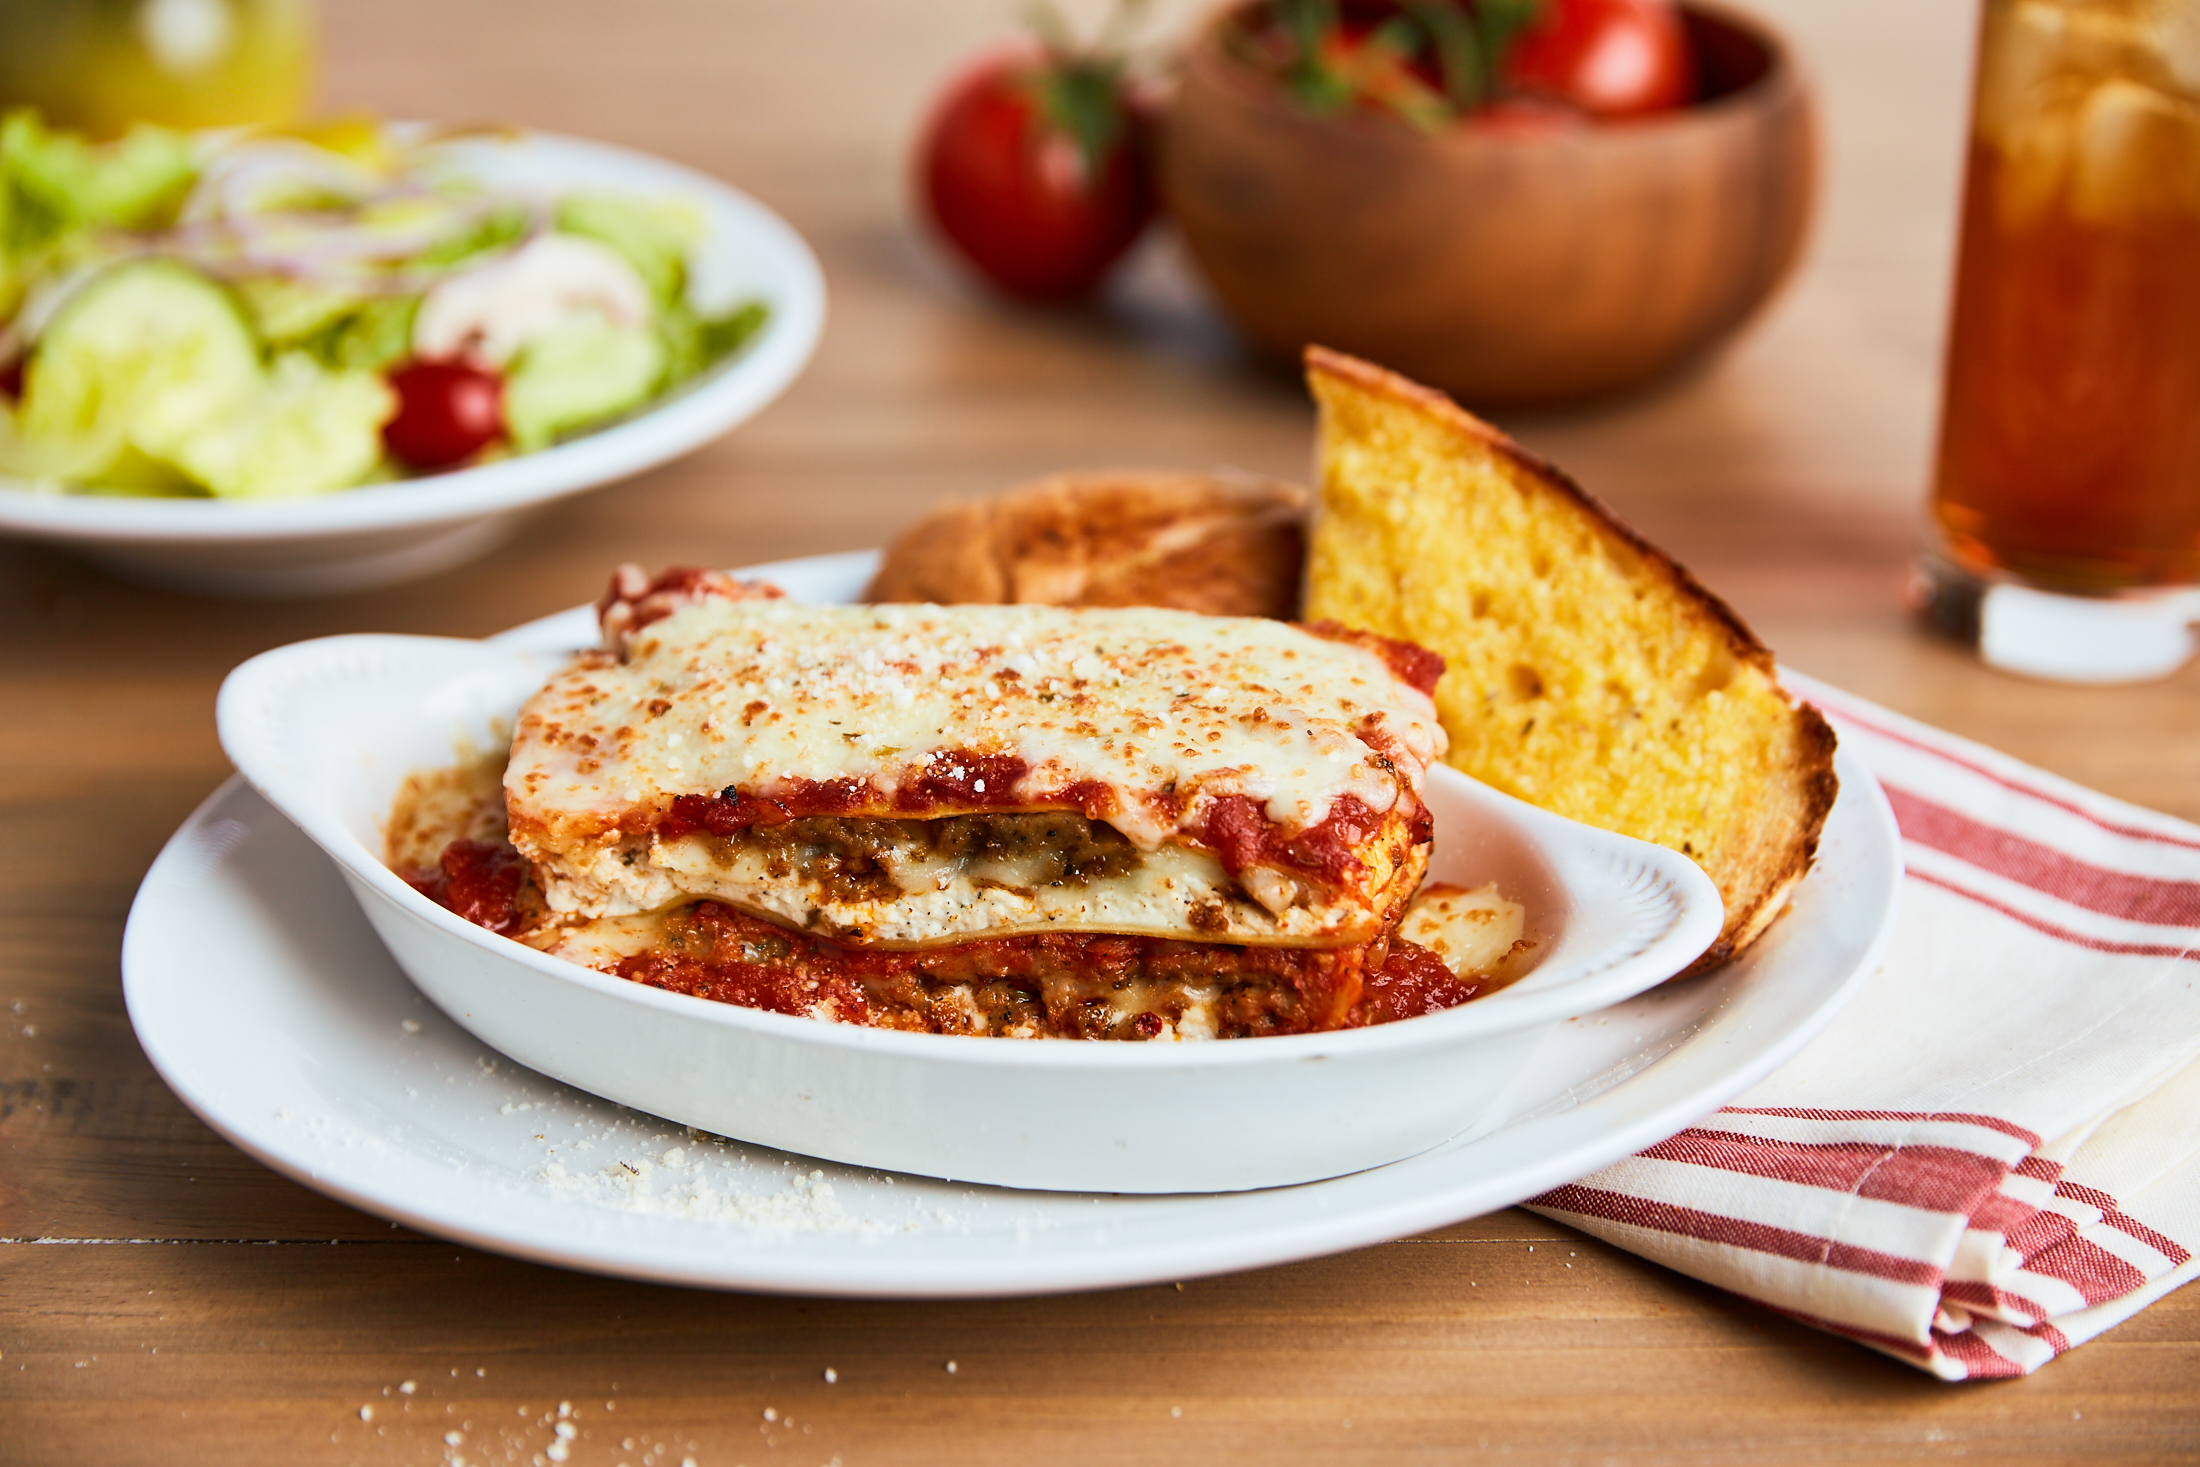 LASAGNA - Always a classic! Layers of seasoned ricotta, mozzarella, sliced meatballs & crumbled saus Johnny's New York Style Pizza Snellville (770)978-8180